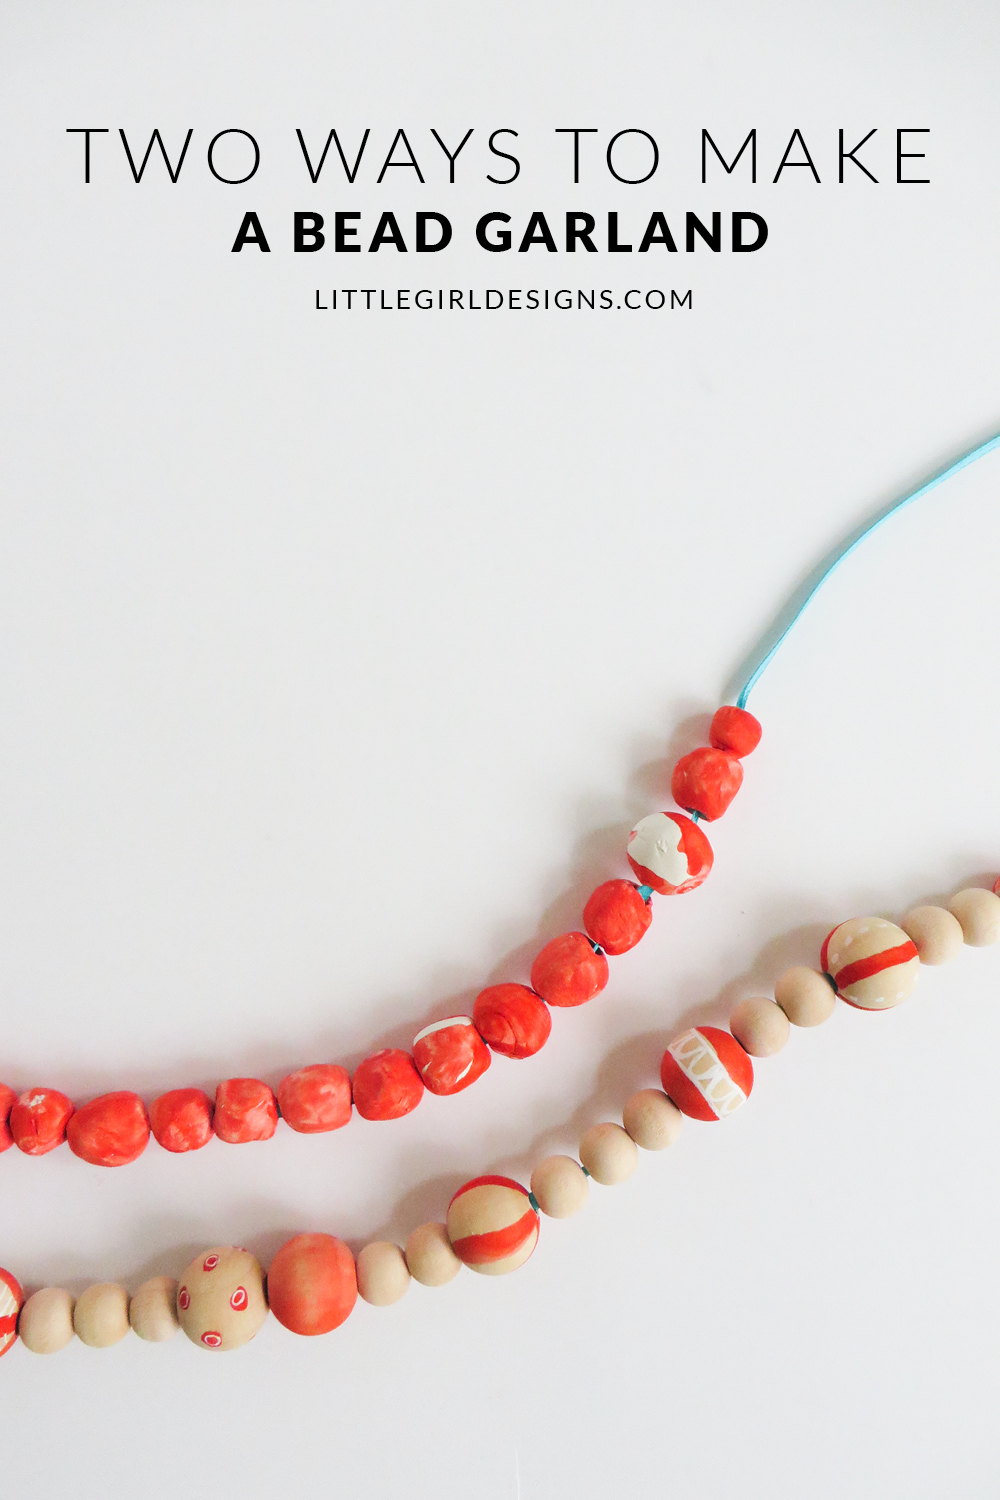 Two Ways to Make a Bead Garland - Two simple tutorials that will show you how to make a homemade bead garland. Change up the colors to match your decor and have fun! Makes a great Christmas gift and adds a cute touch to wreaths too. via littlegirldesigns.com